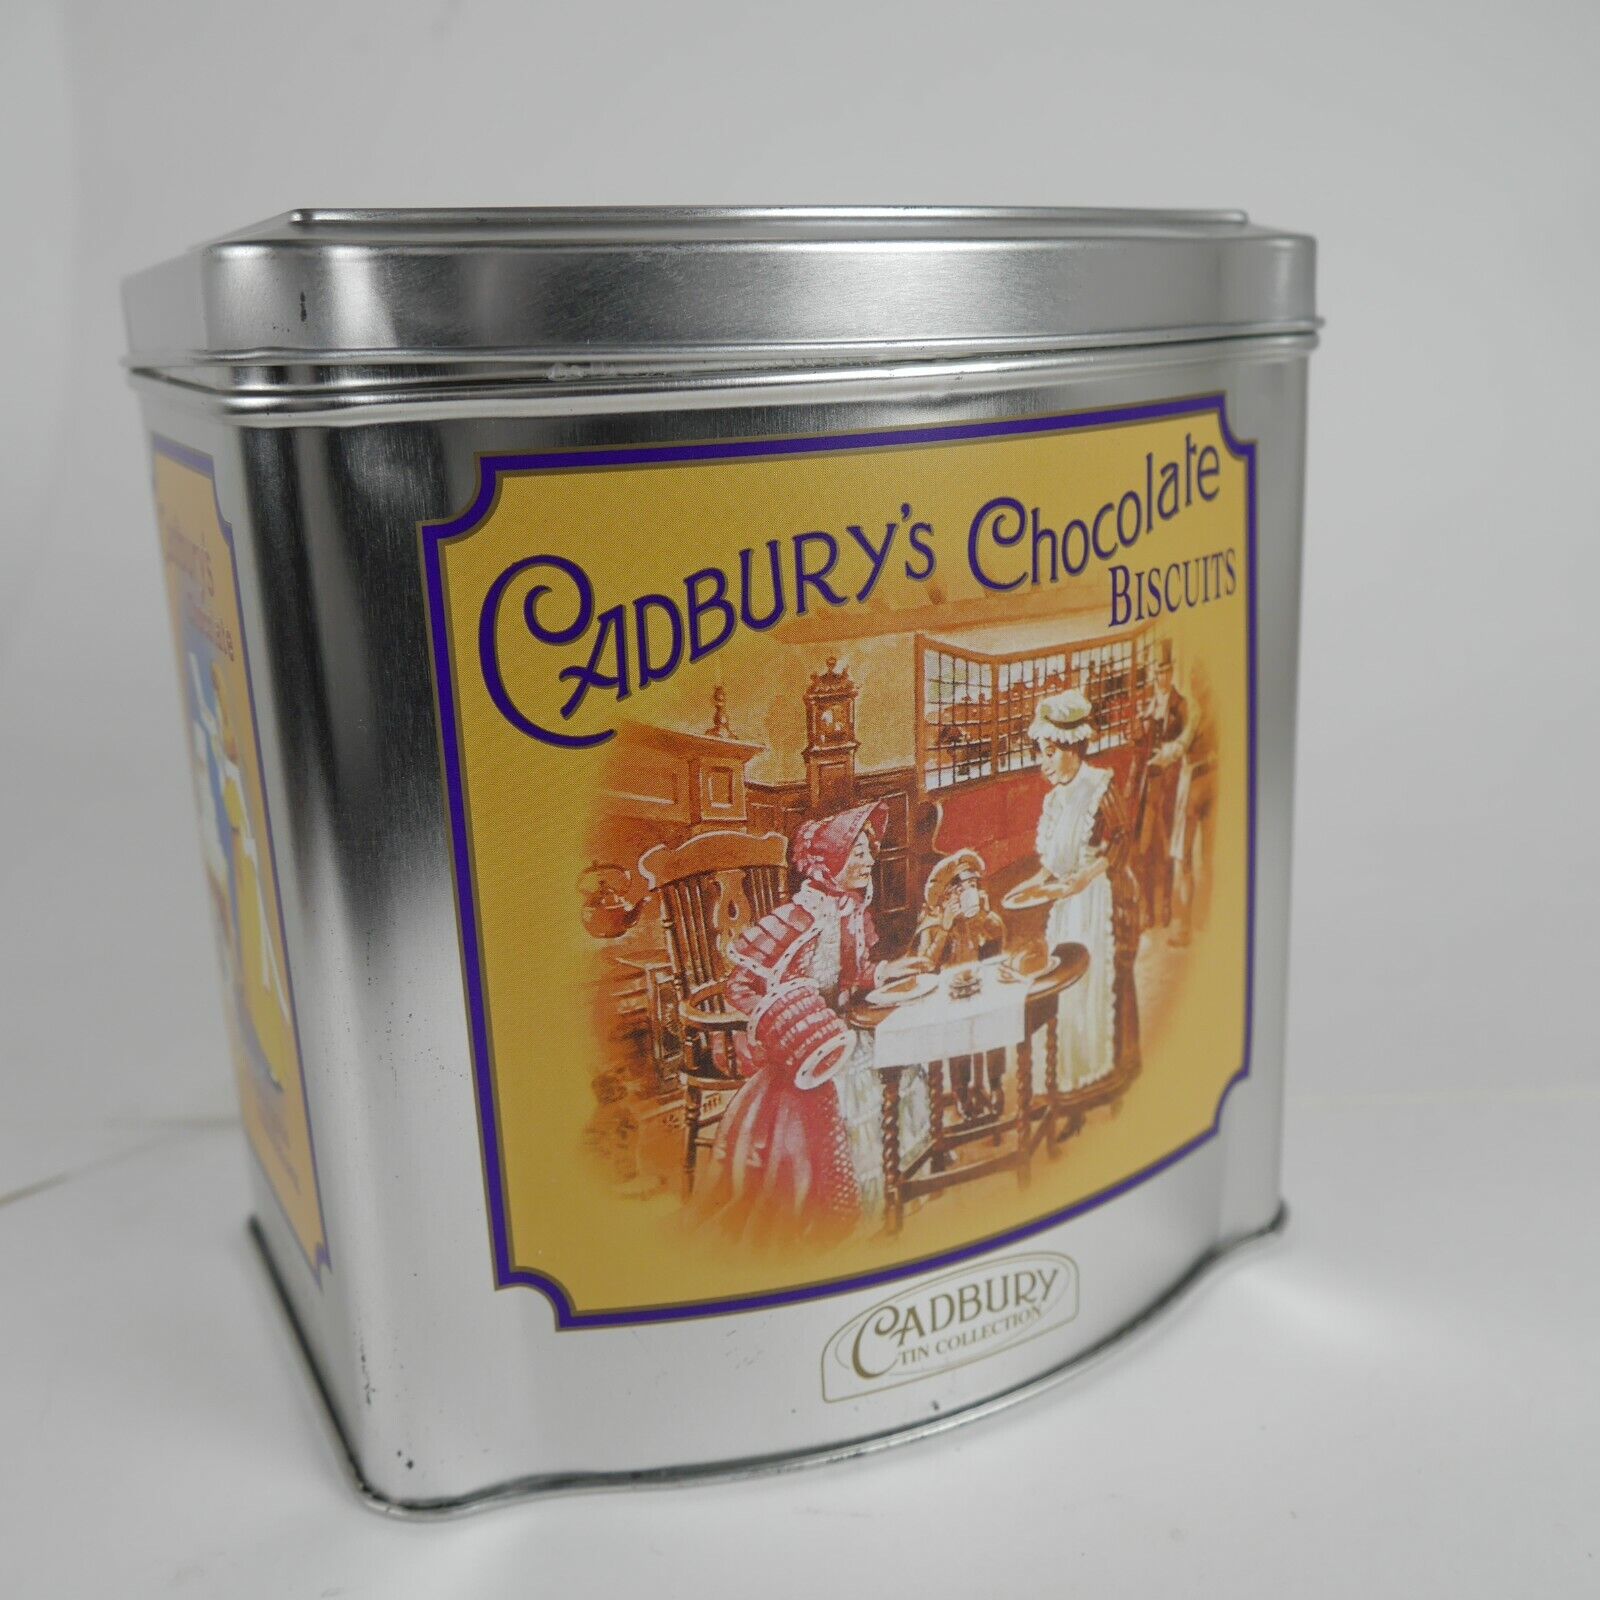 Vintage Cadbury\'s Chocolate Biscuits Advertising Tin Canister Box Container